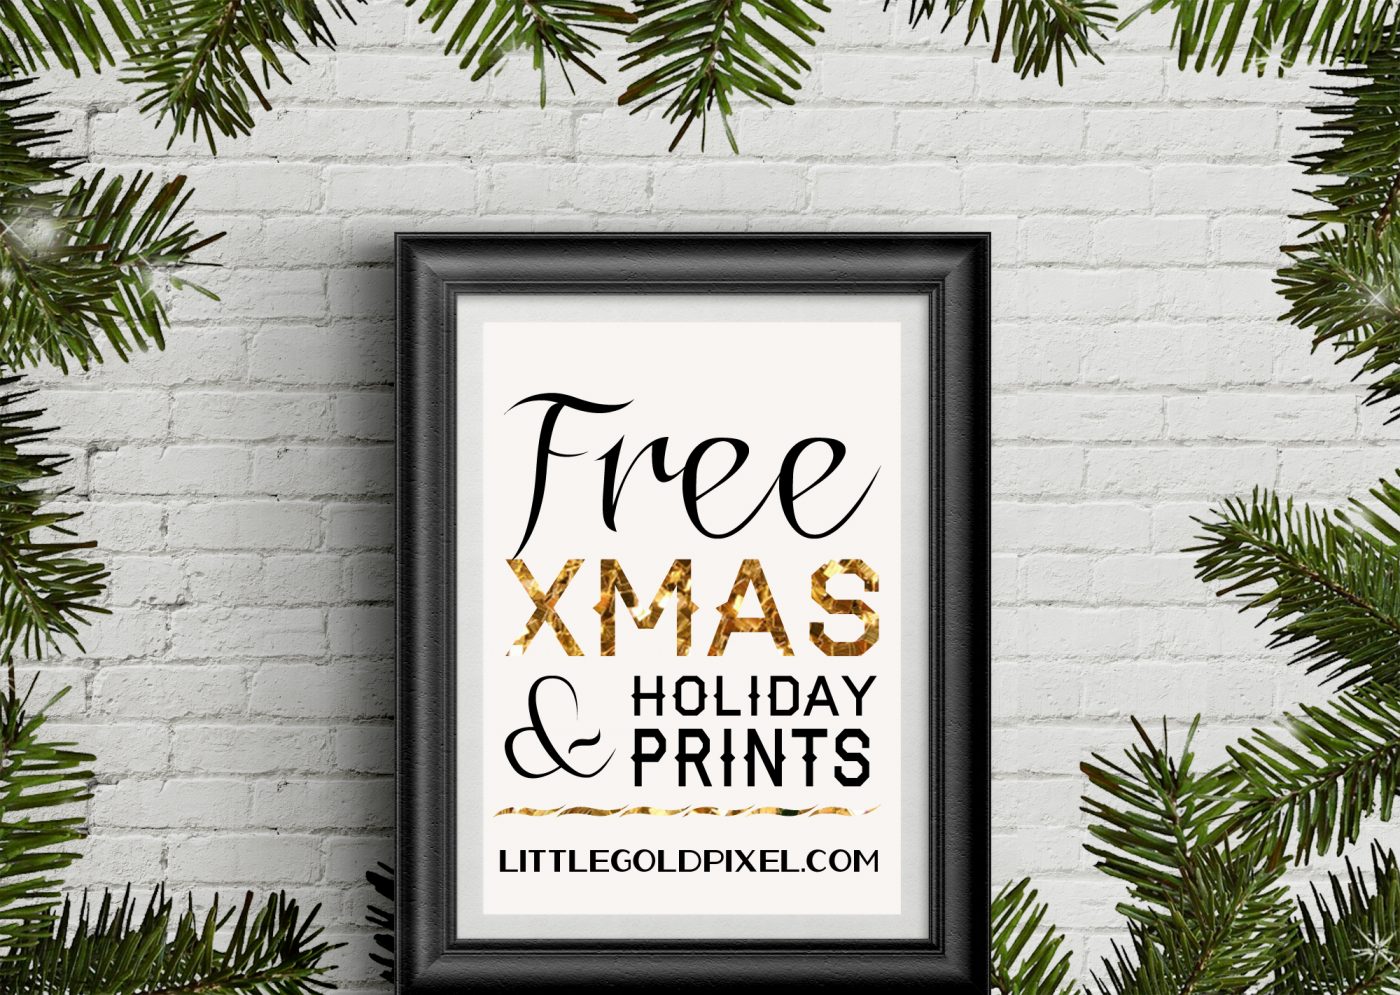 35+ Free Christmas Printables to Spiffy Up Your Holiday Decor